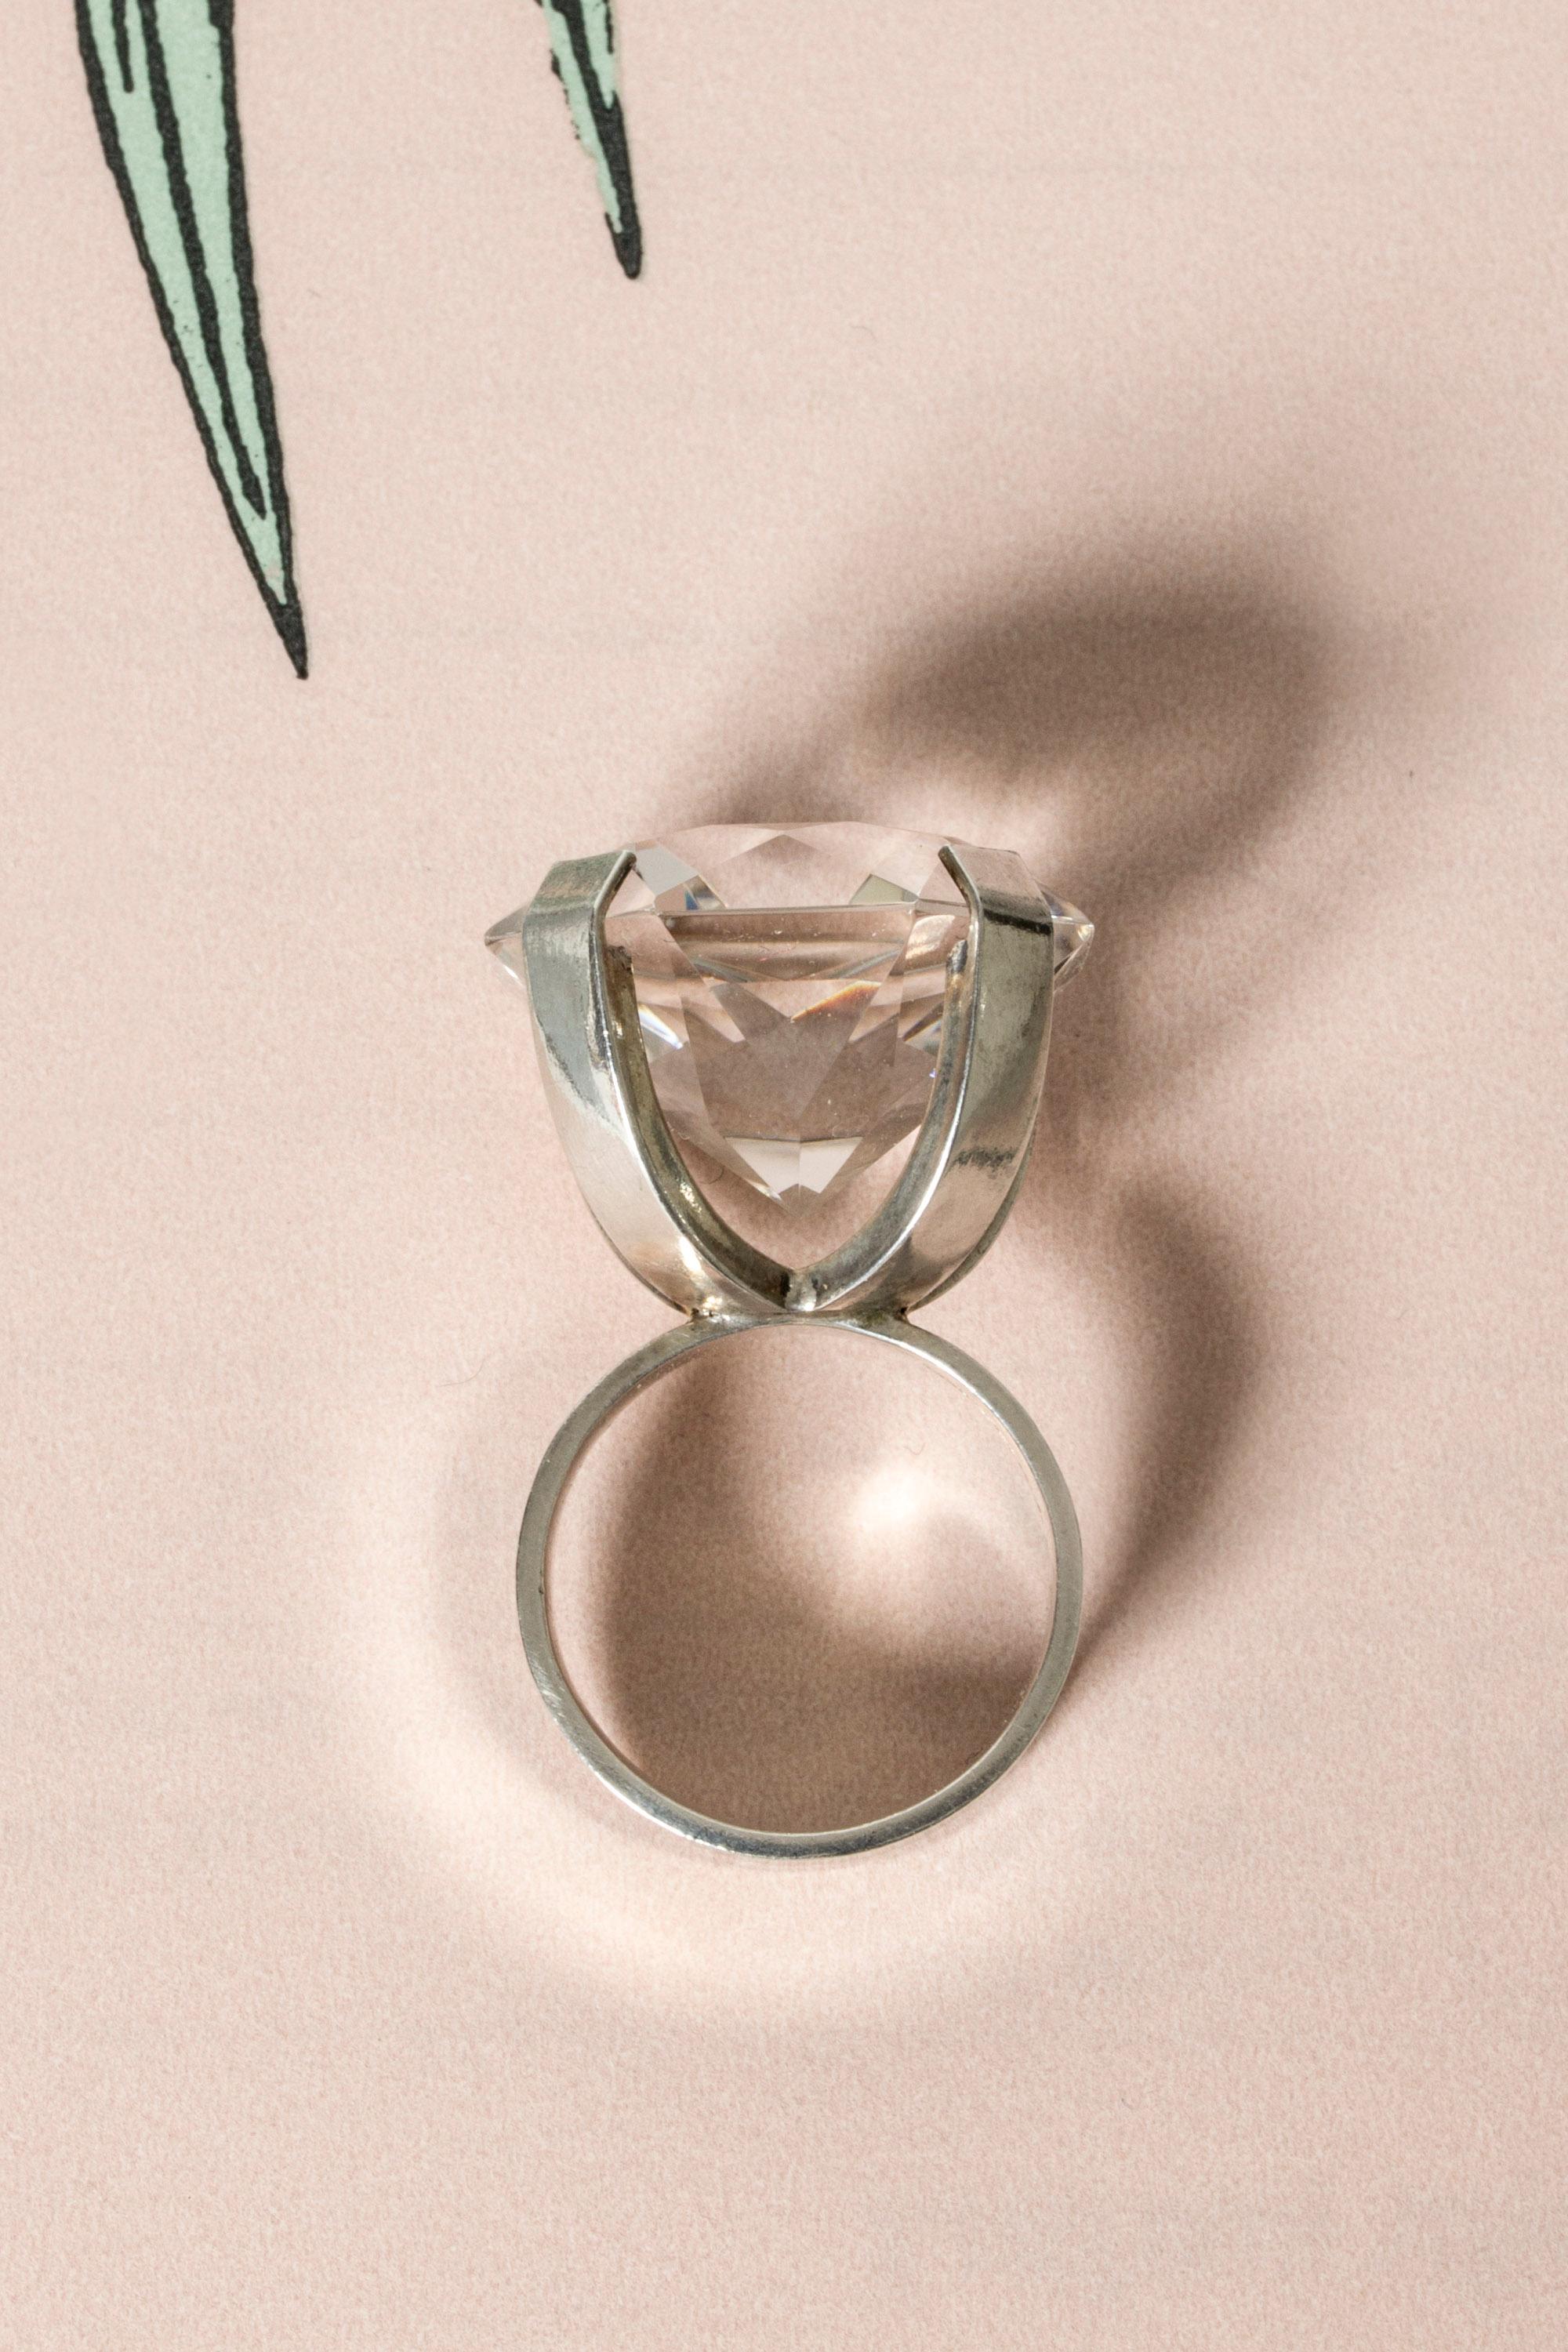 Modernist Silver and Rock Crystal Ring by Waldemar Jonsson, Sweden, 1969